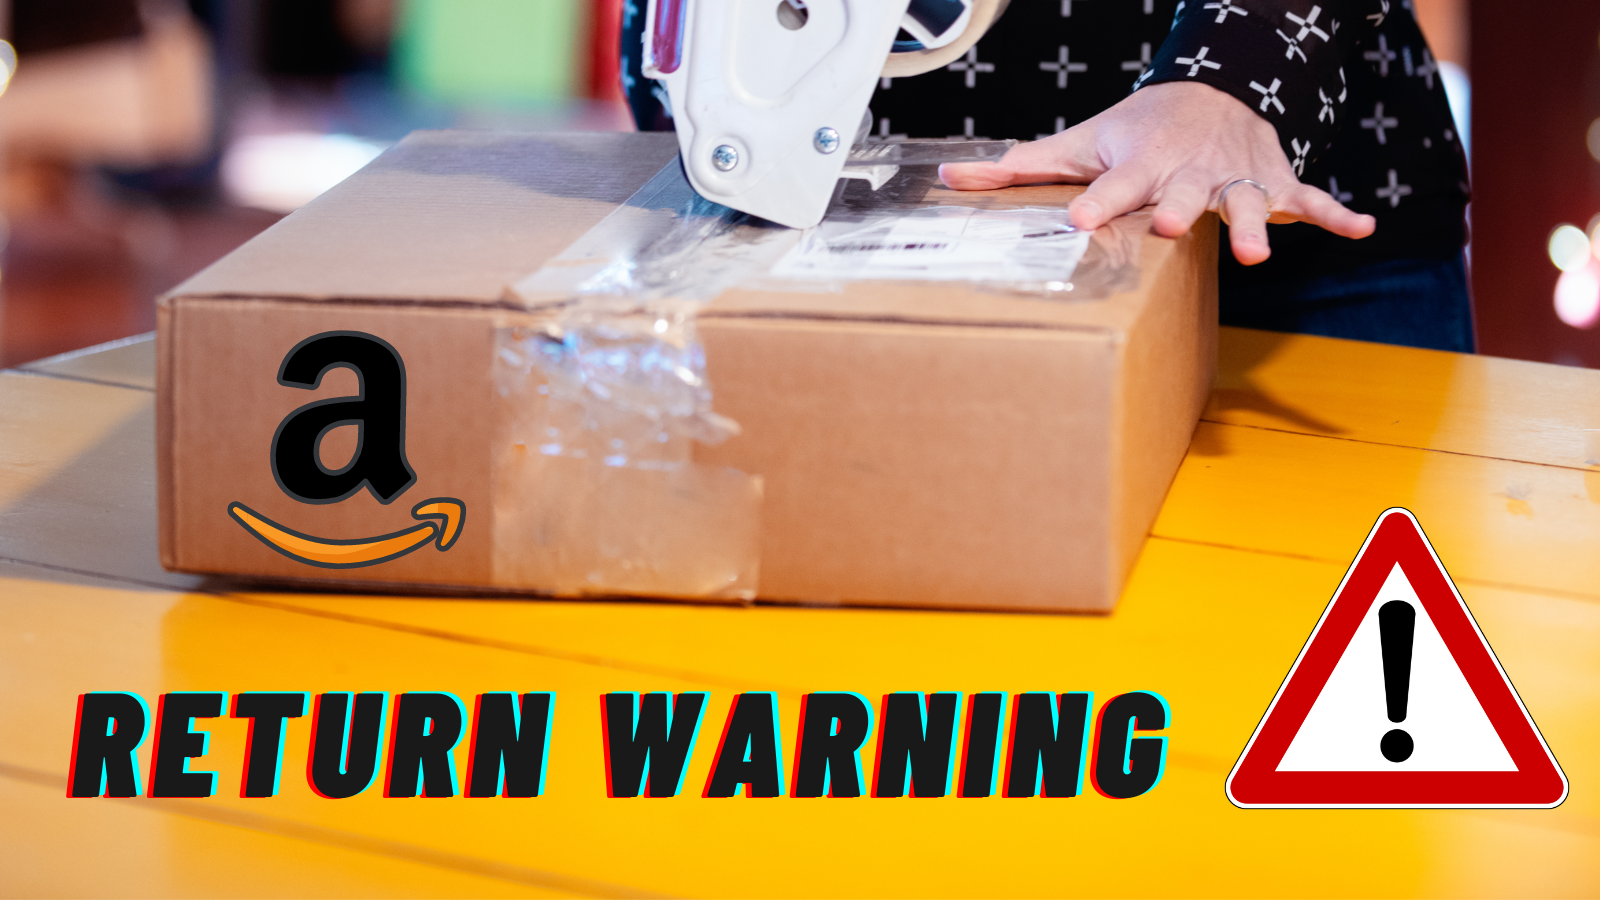 All You Need to Know About Amazon Return Warning in 2022!